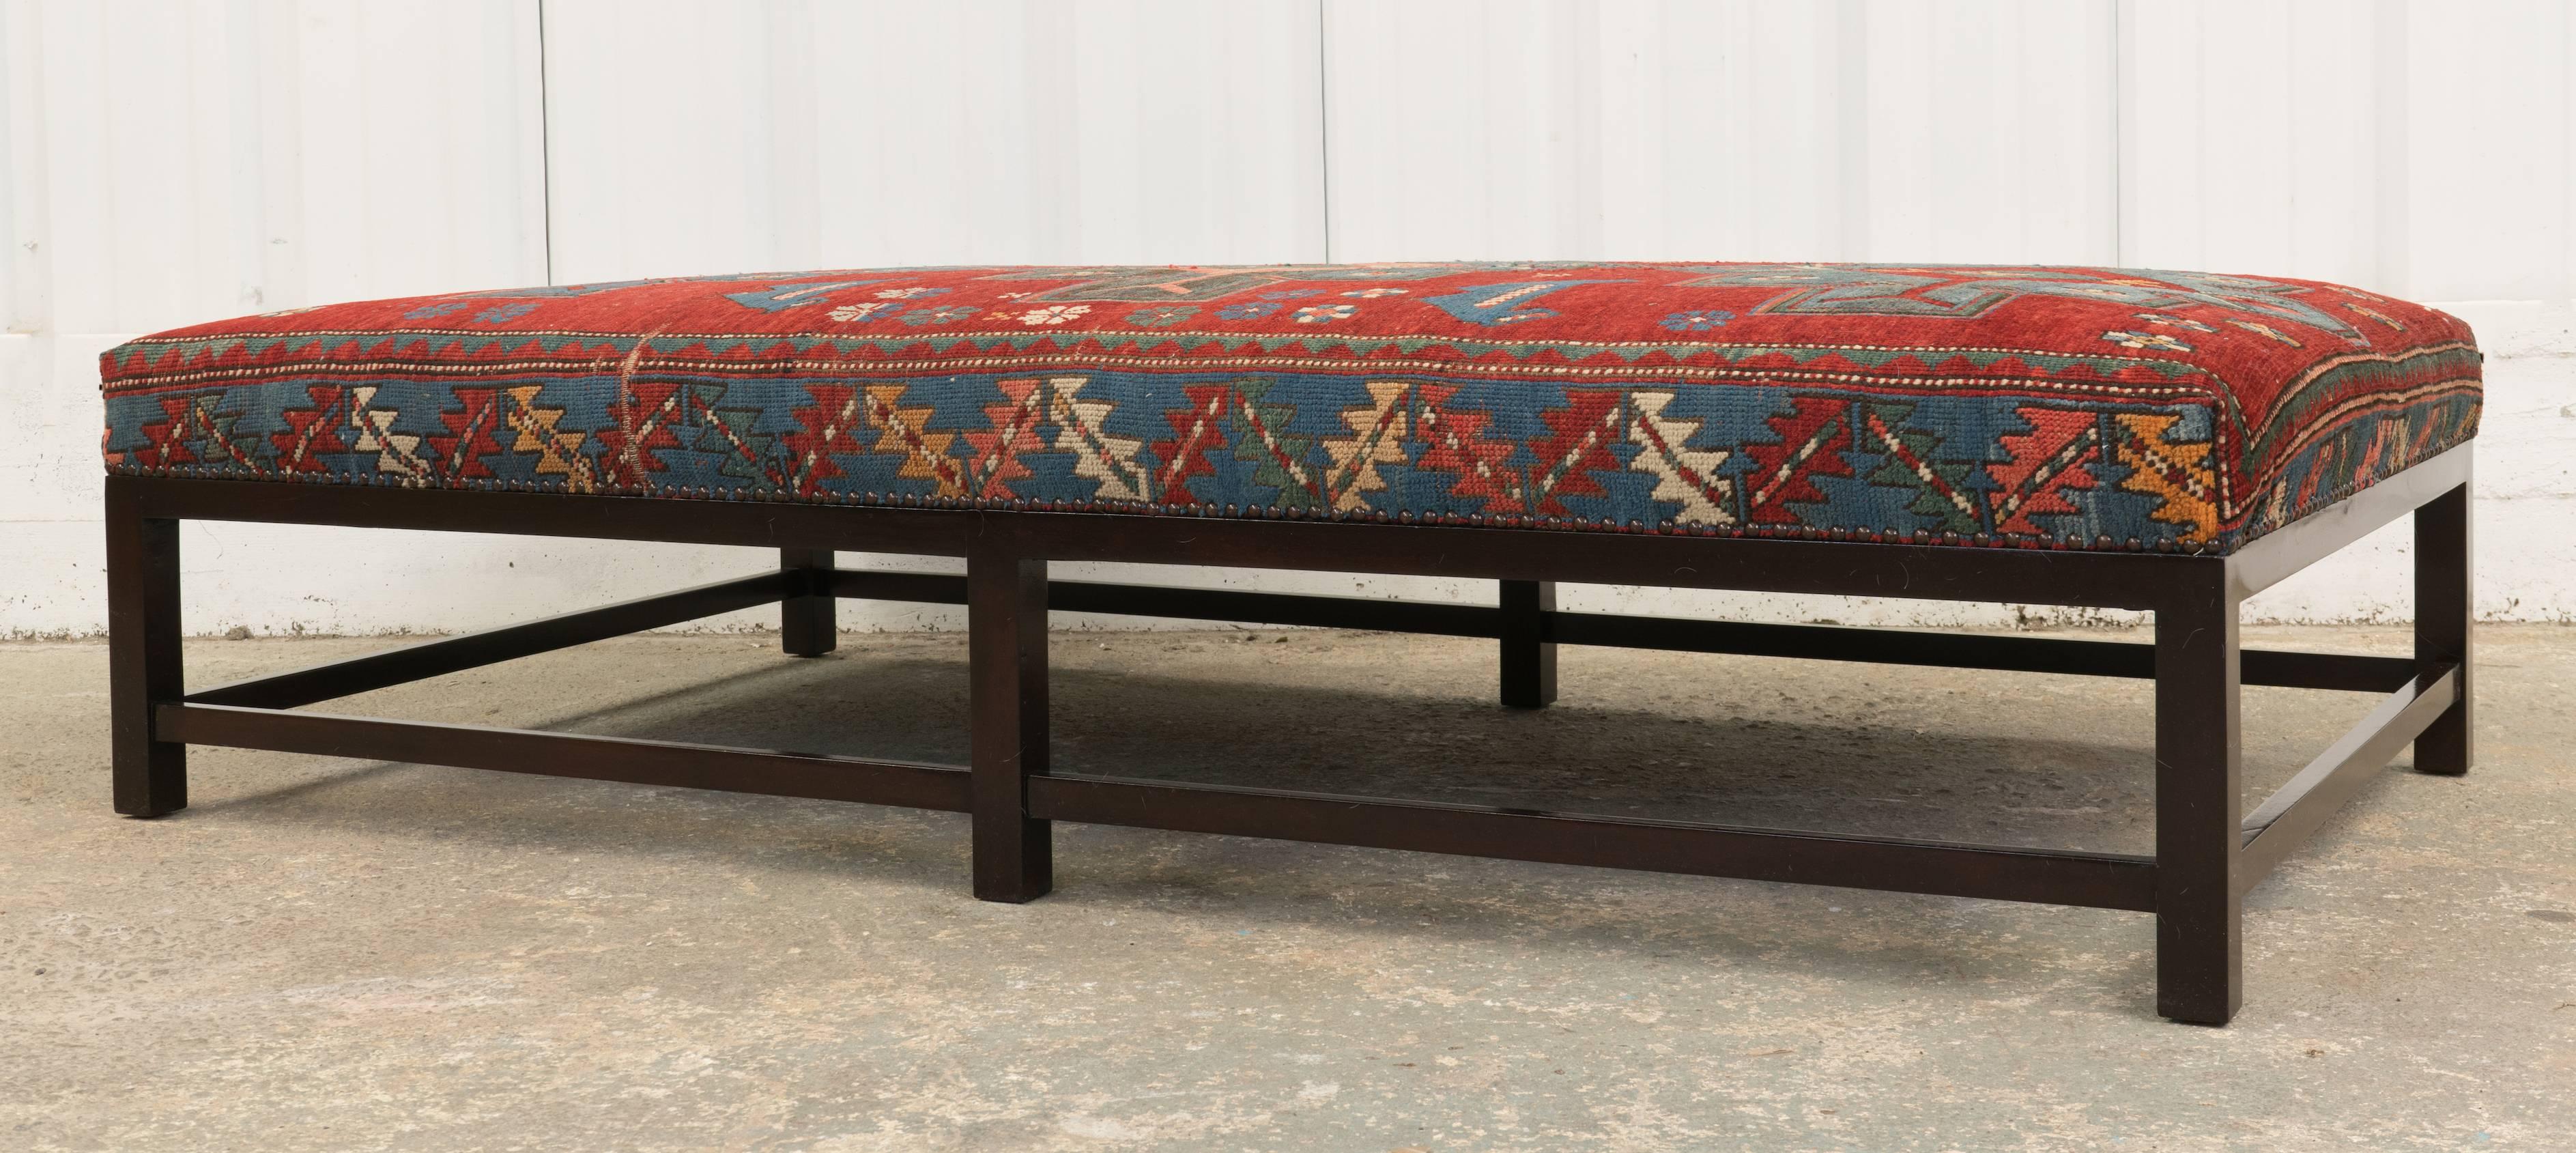 Hollywood at Home's Lexington ottoman with red/blue vintage textile.